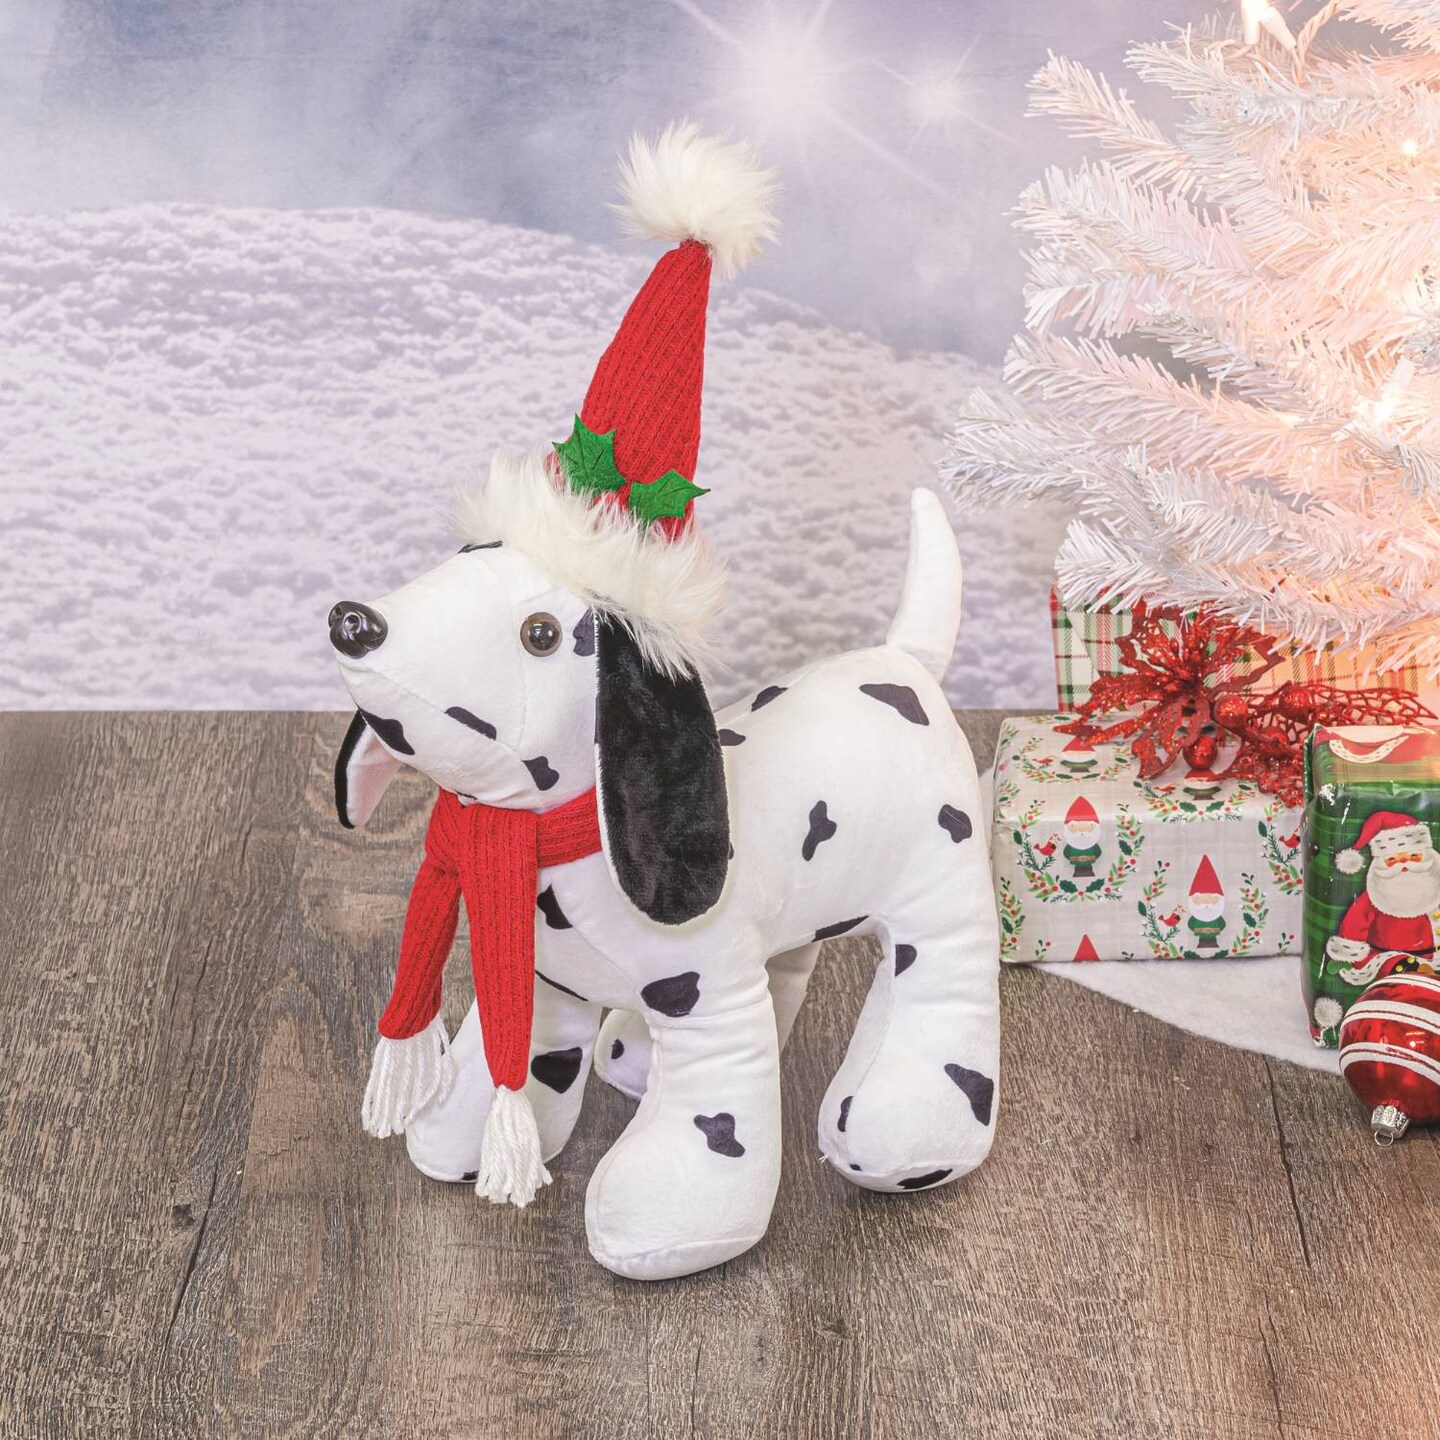 Santa Dog Christmas Plush Decor with Soft, White, Fuzzy Trimmed Knit Santa Hat and Scarf, Freestanding, 12.25 inch